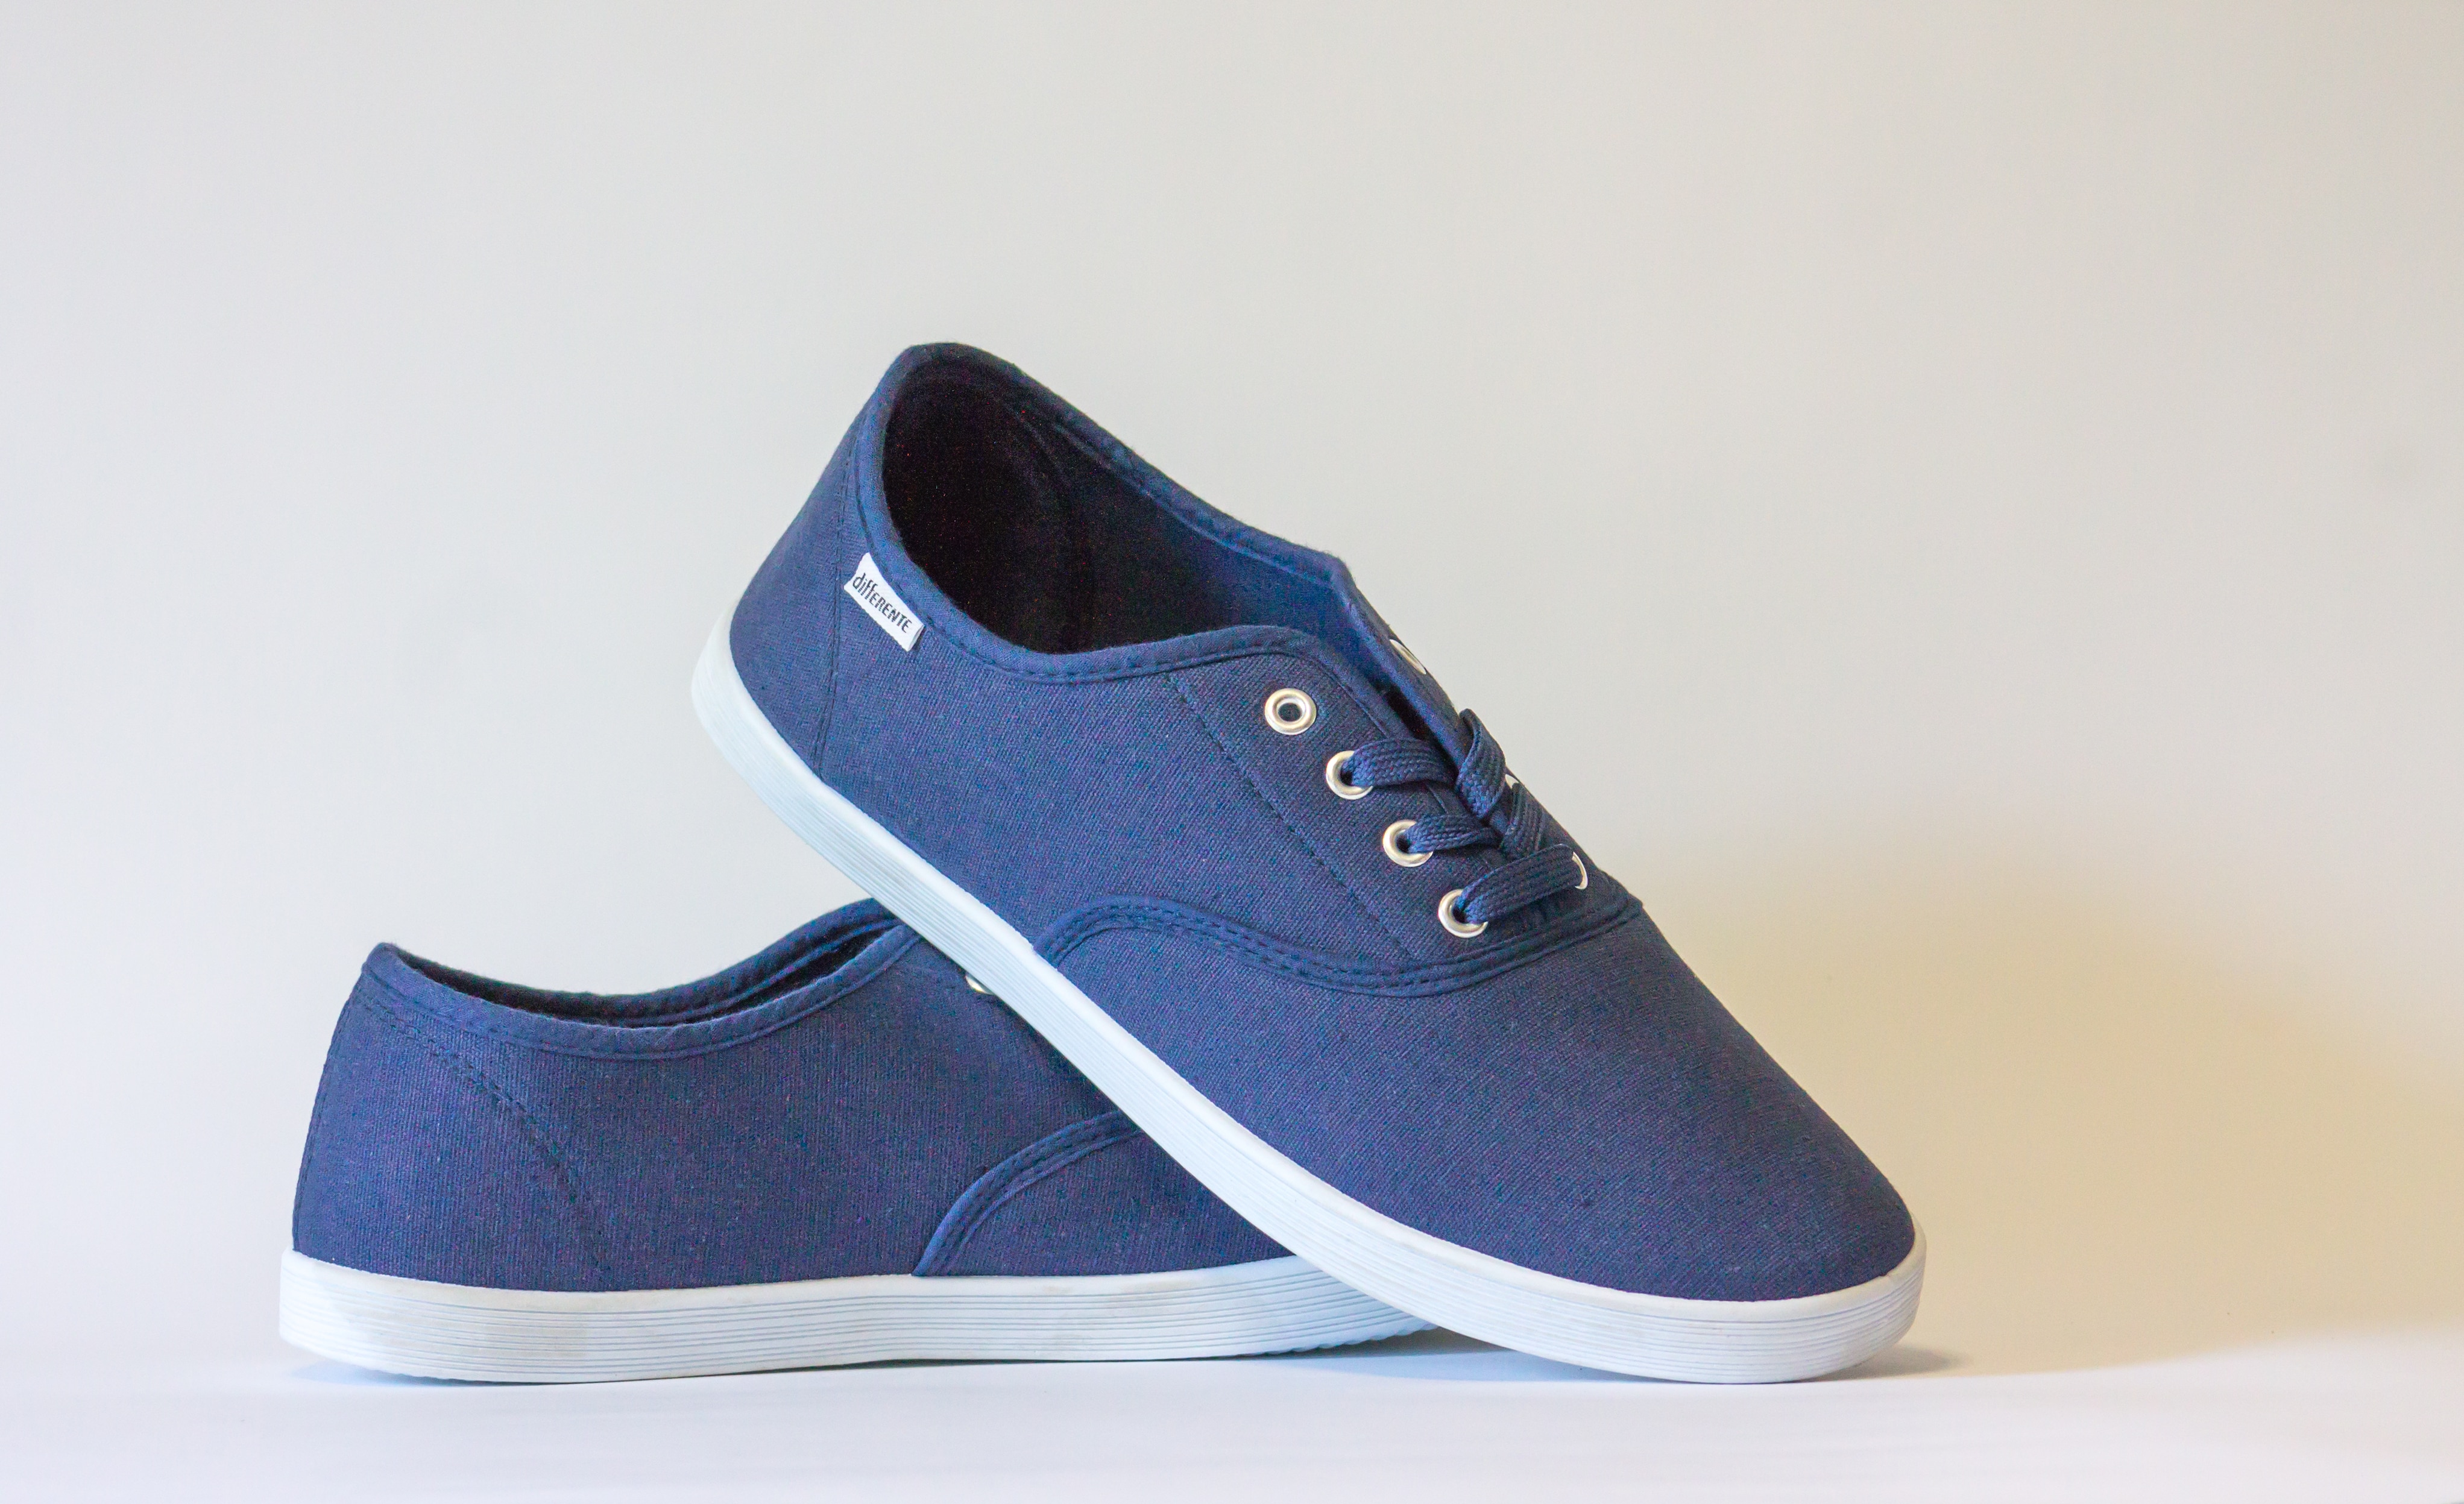 pair of blue and white low top sneakers